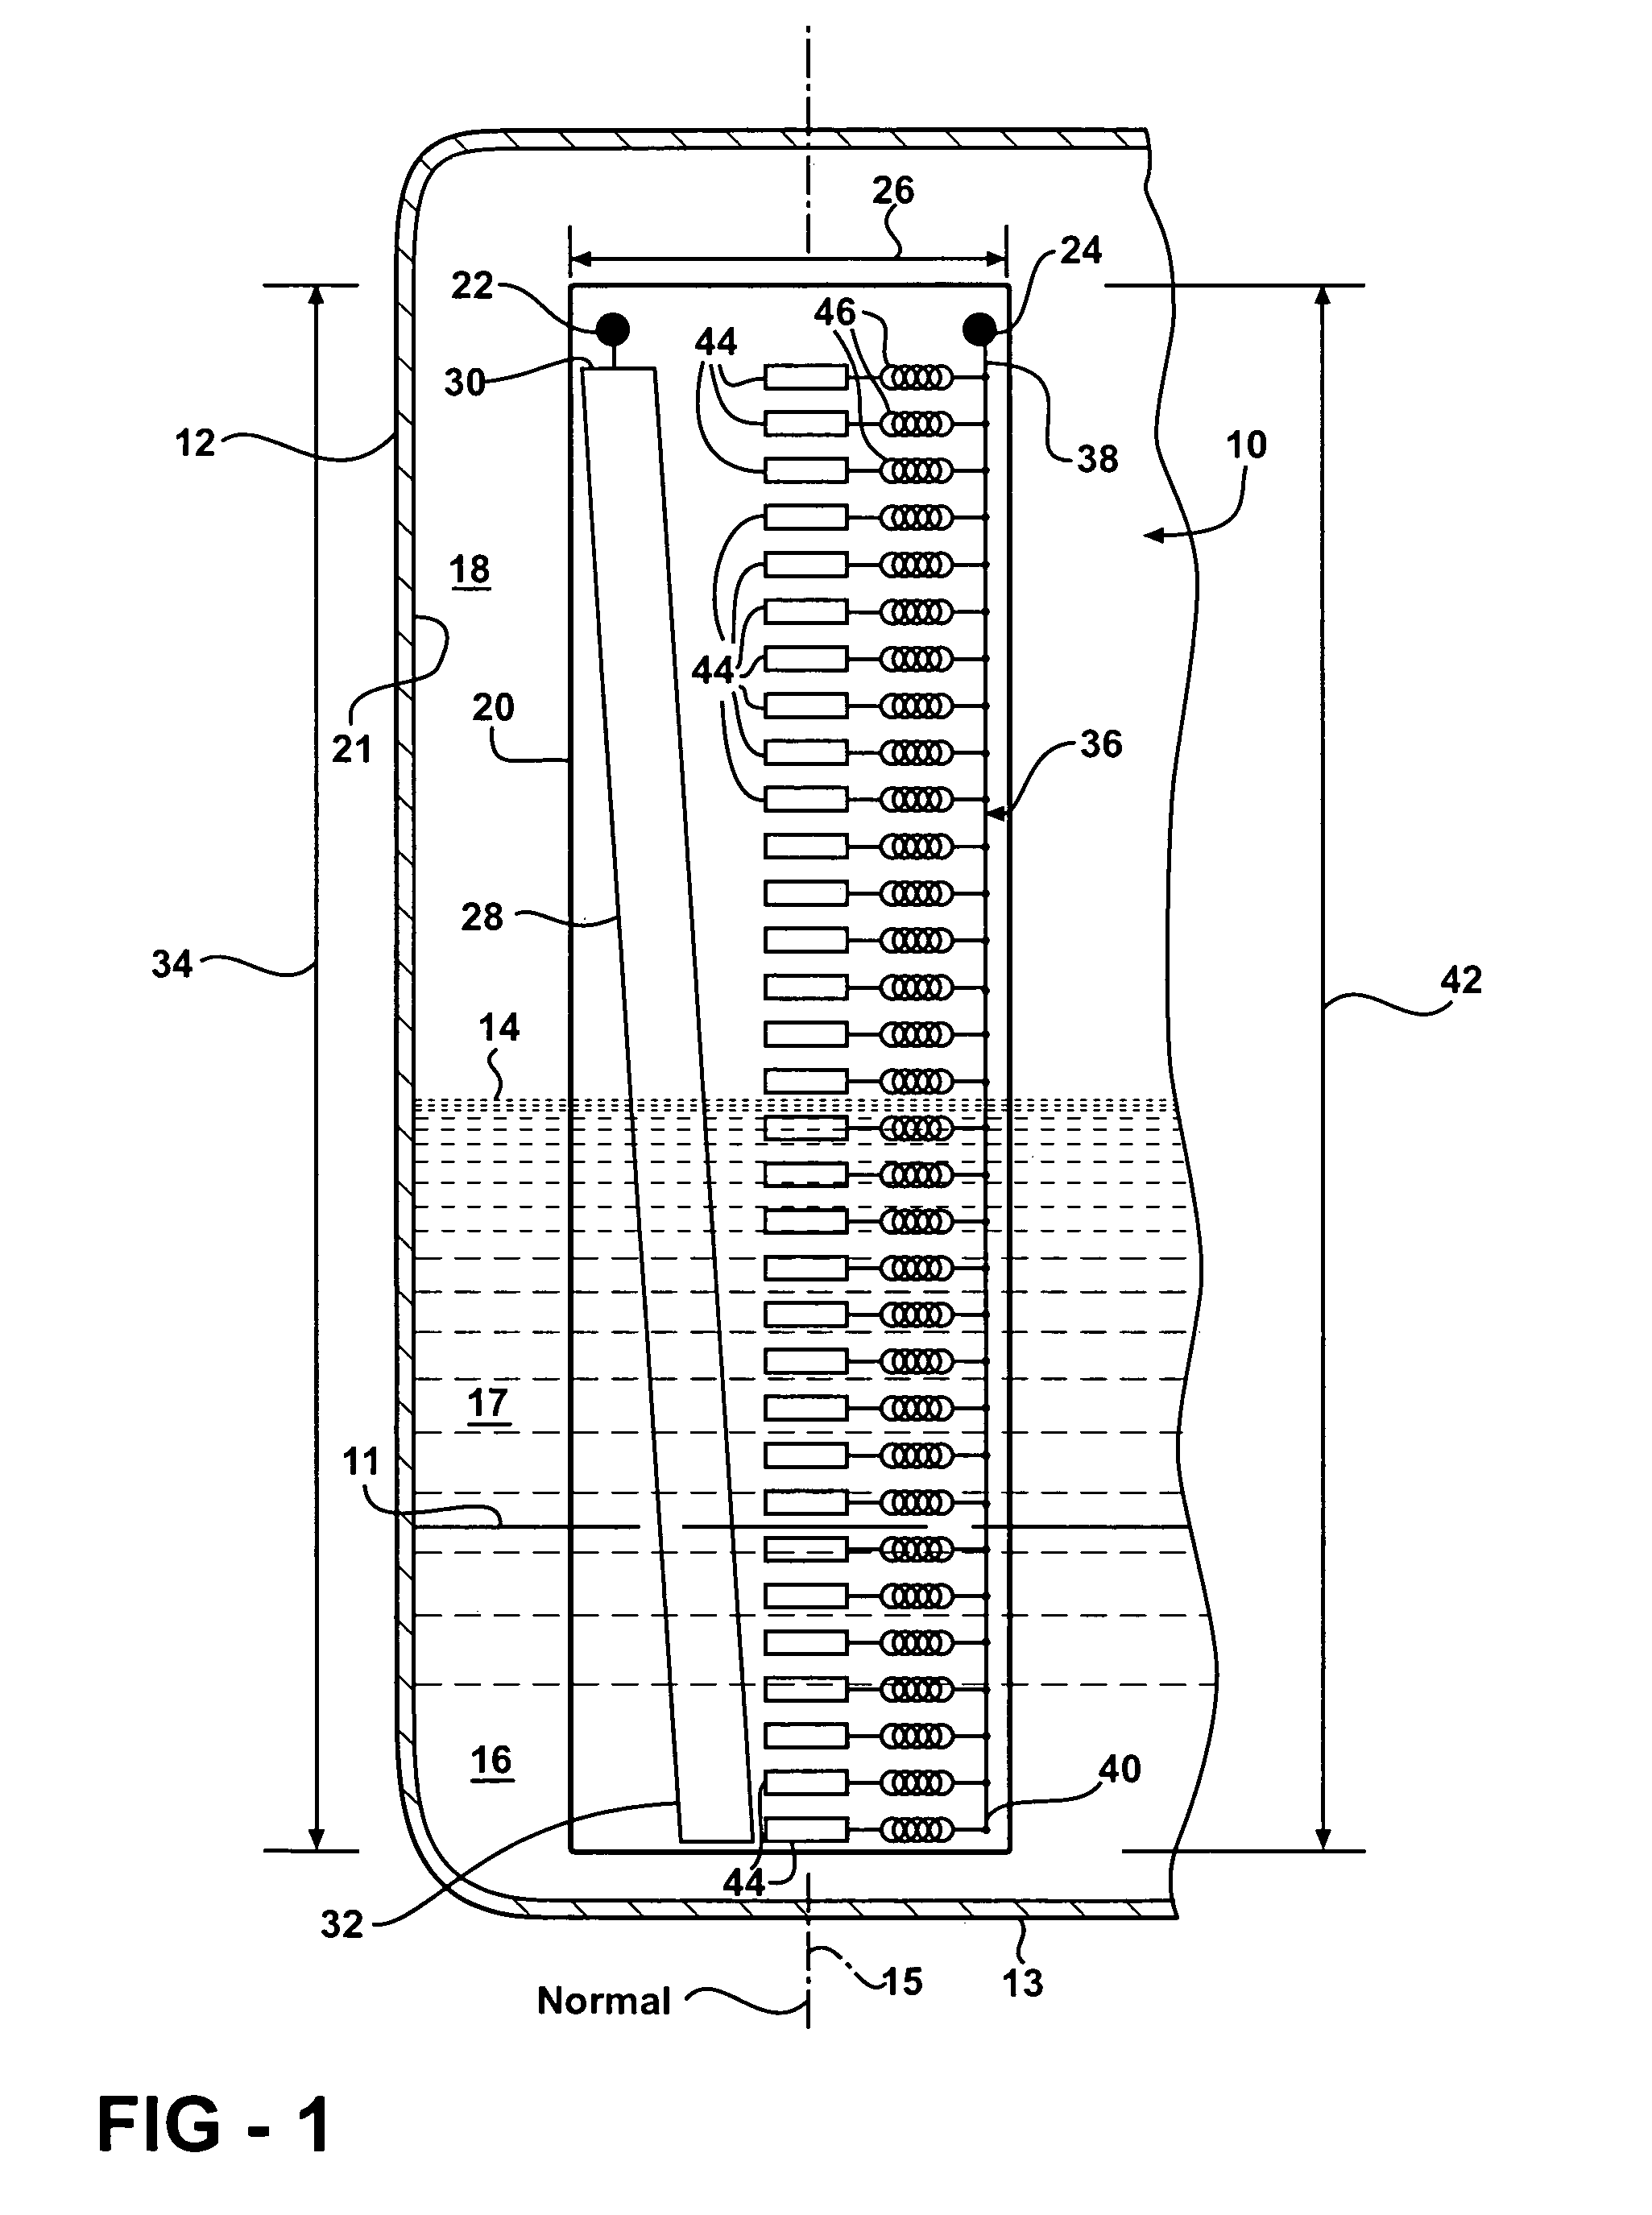 Method of measuring fluid phases in a reservoir